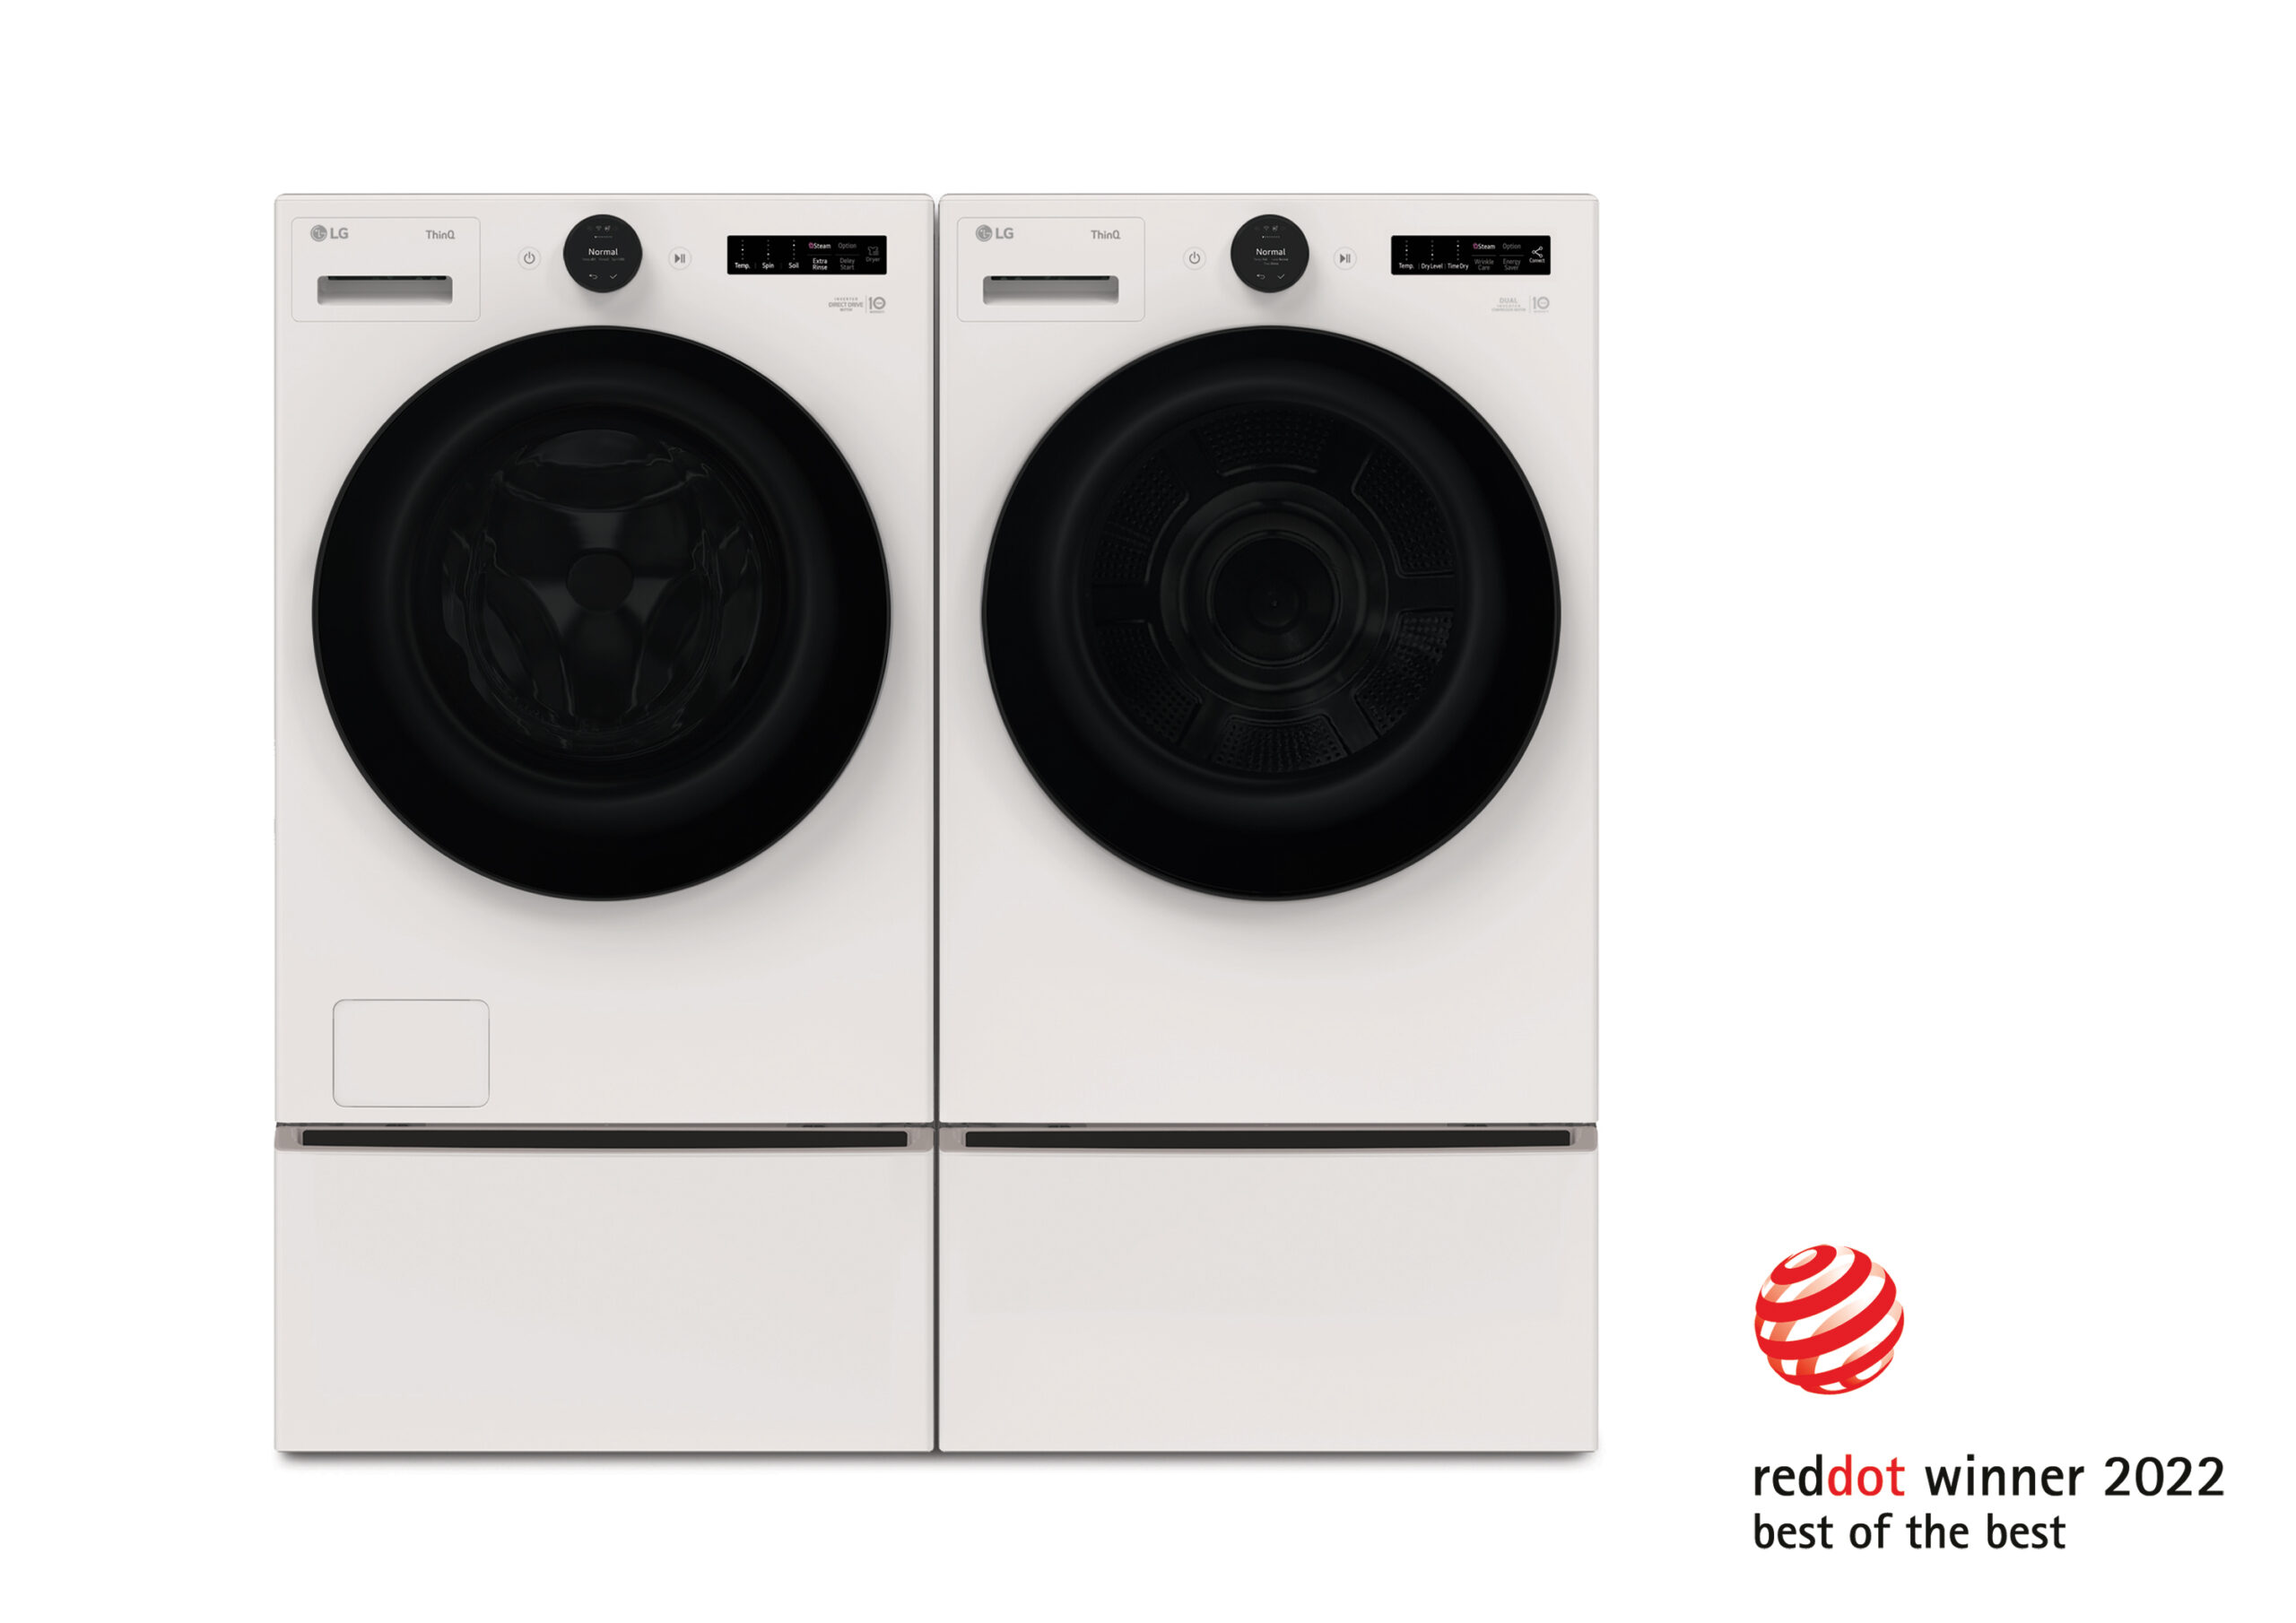 Logo of ‘reddot award 2022 best of the best’ with LG’s washer and dryer with an upgradability option